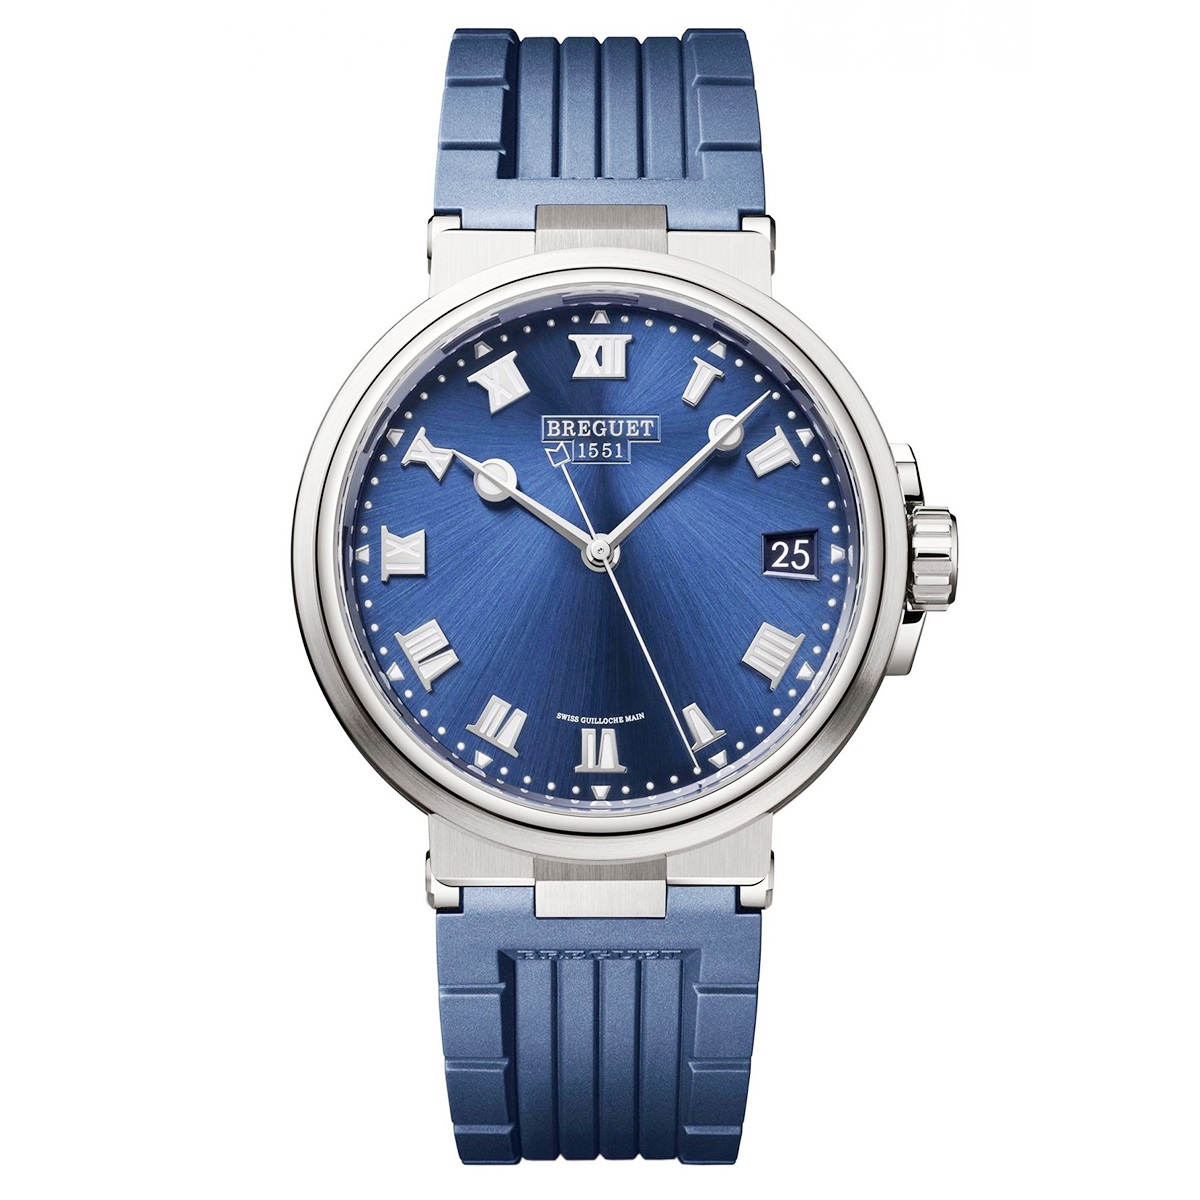 Marine 40mm Blue Dial Automatic Rubber Strap Watch